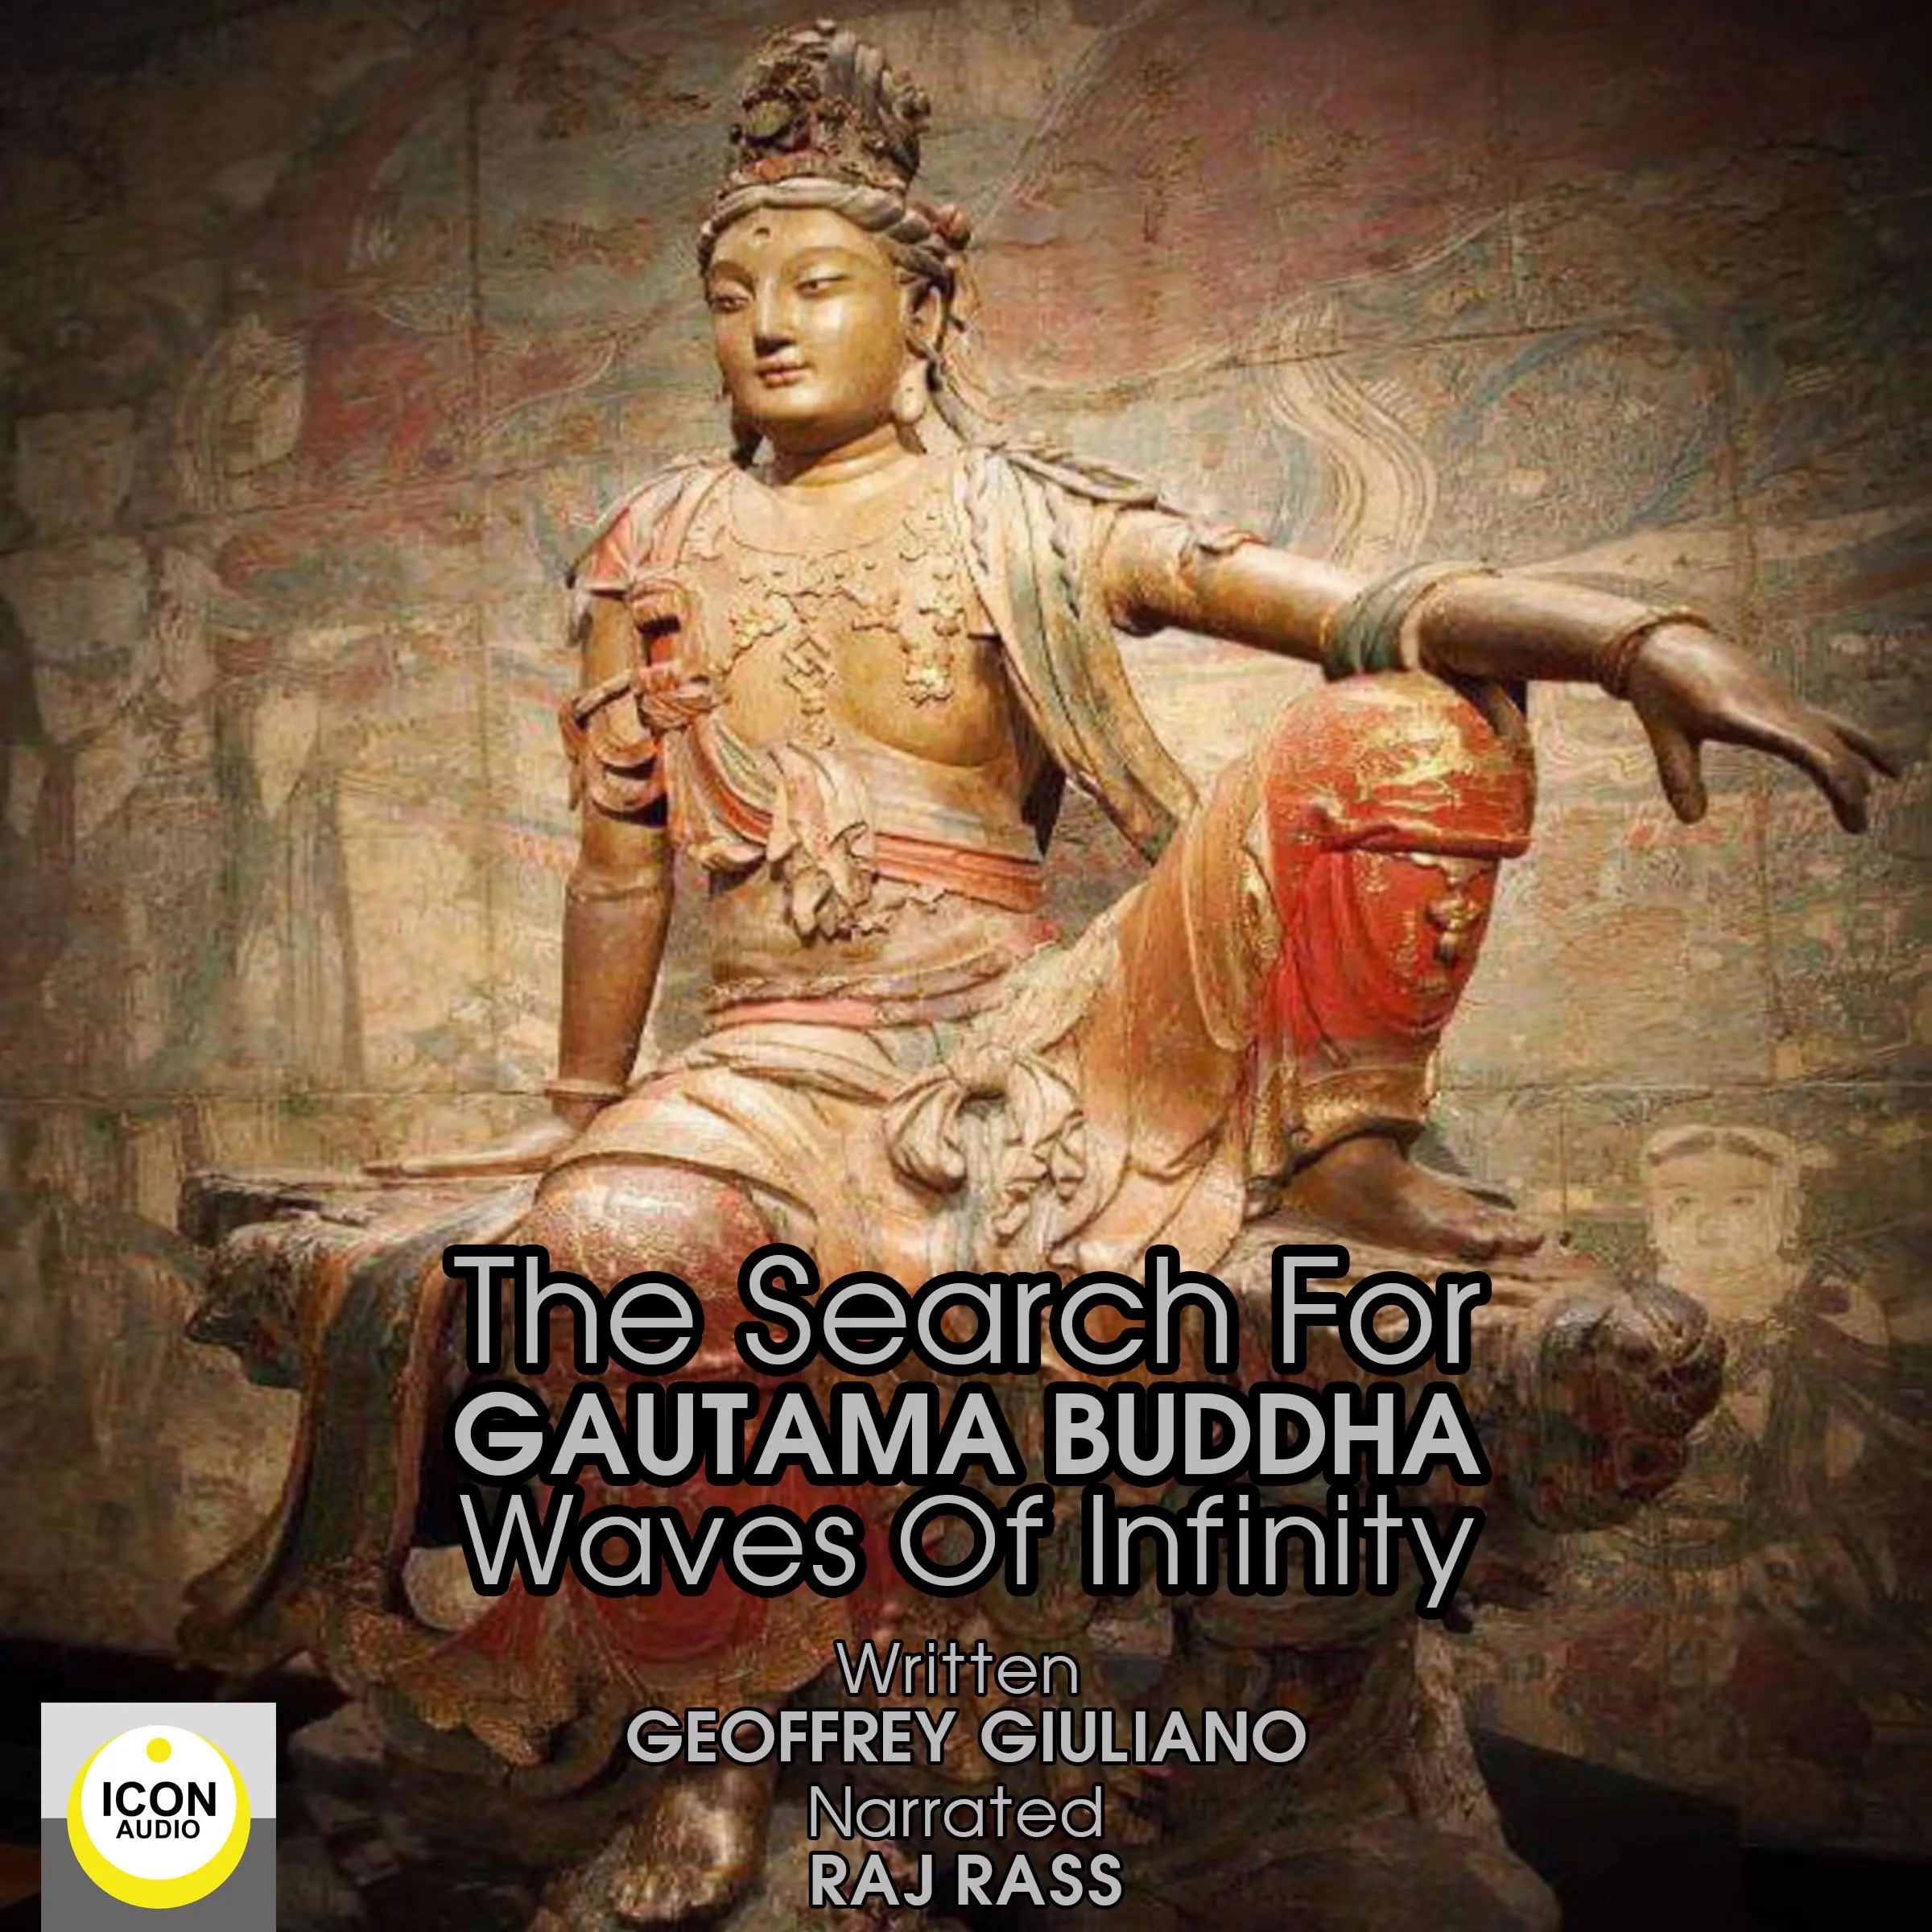 The Search for Gautama Buddha; Waves of Infinity Audiobook by Geoffrey Giuliano